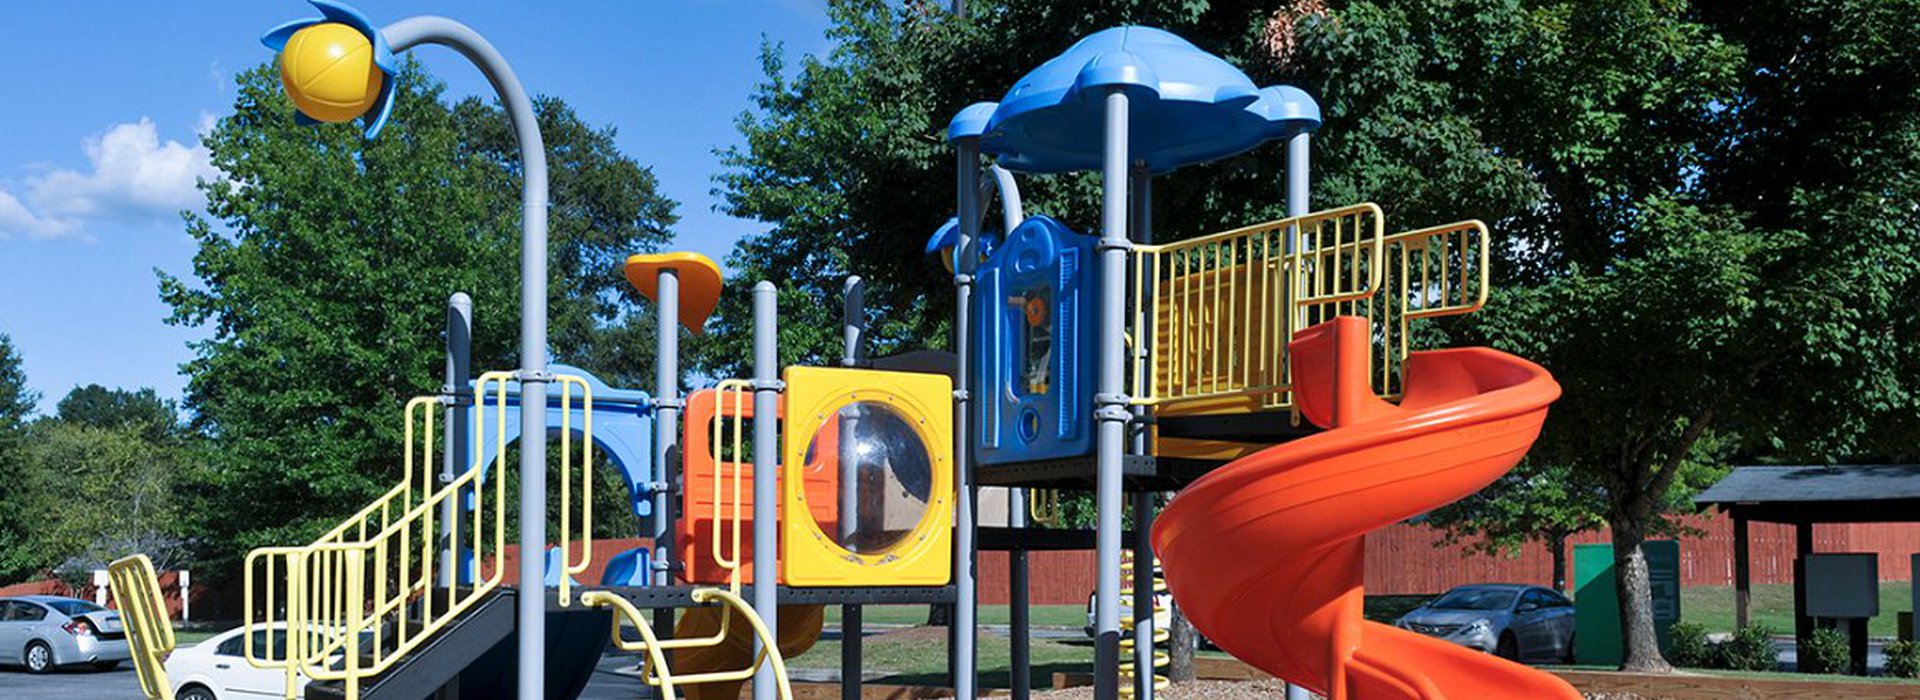 Willow Chase Cove playground